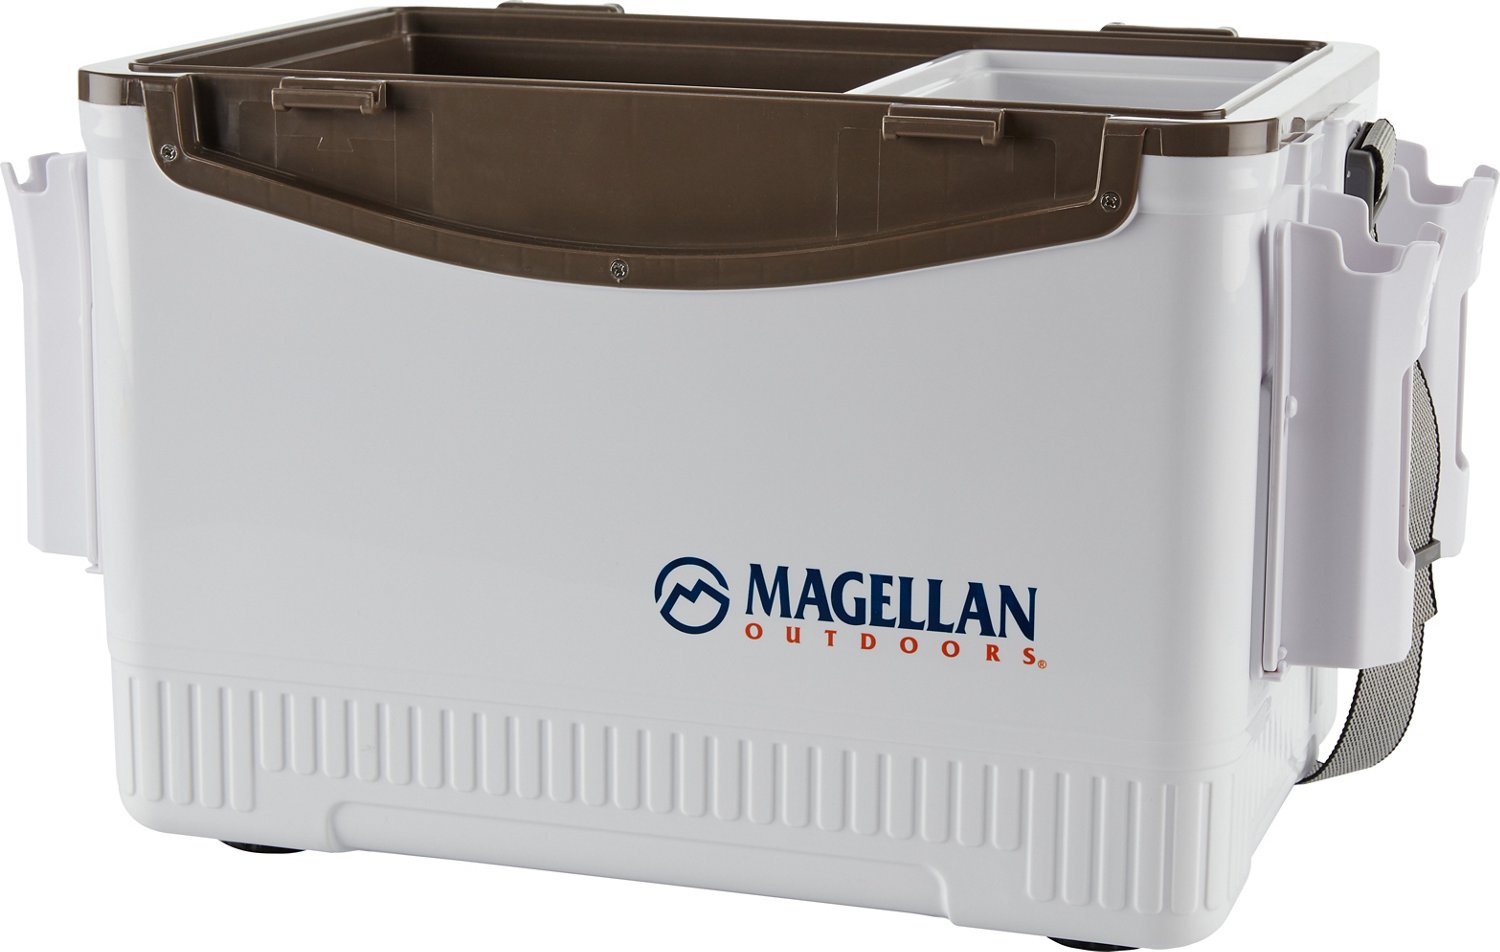 Magellan Outdoors 30 qt Insulated Bait/Dry Box